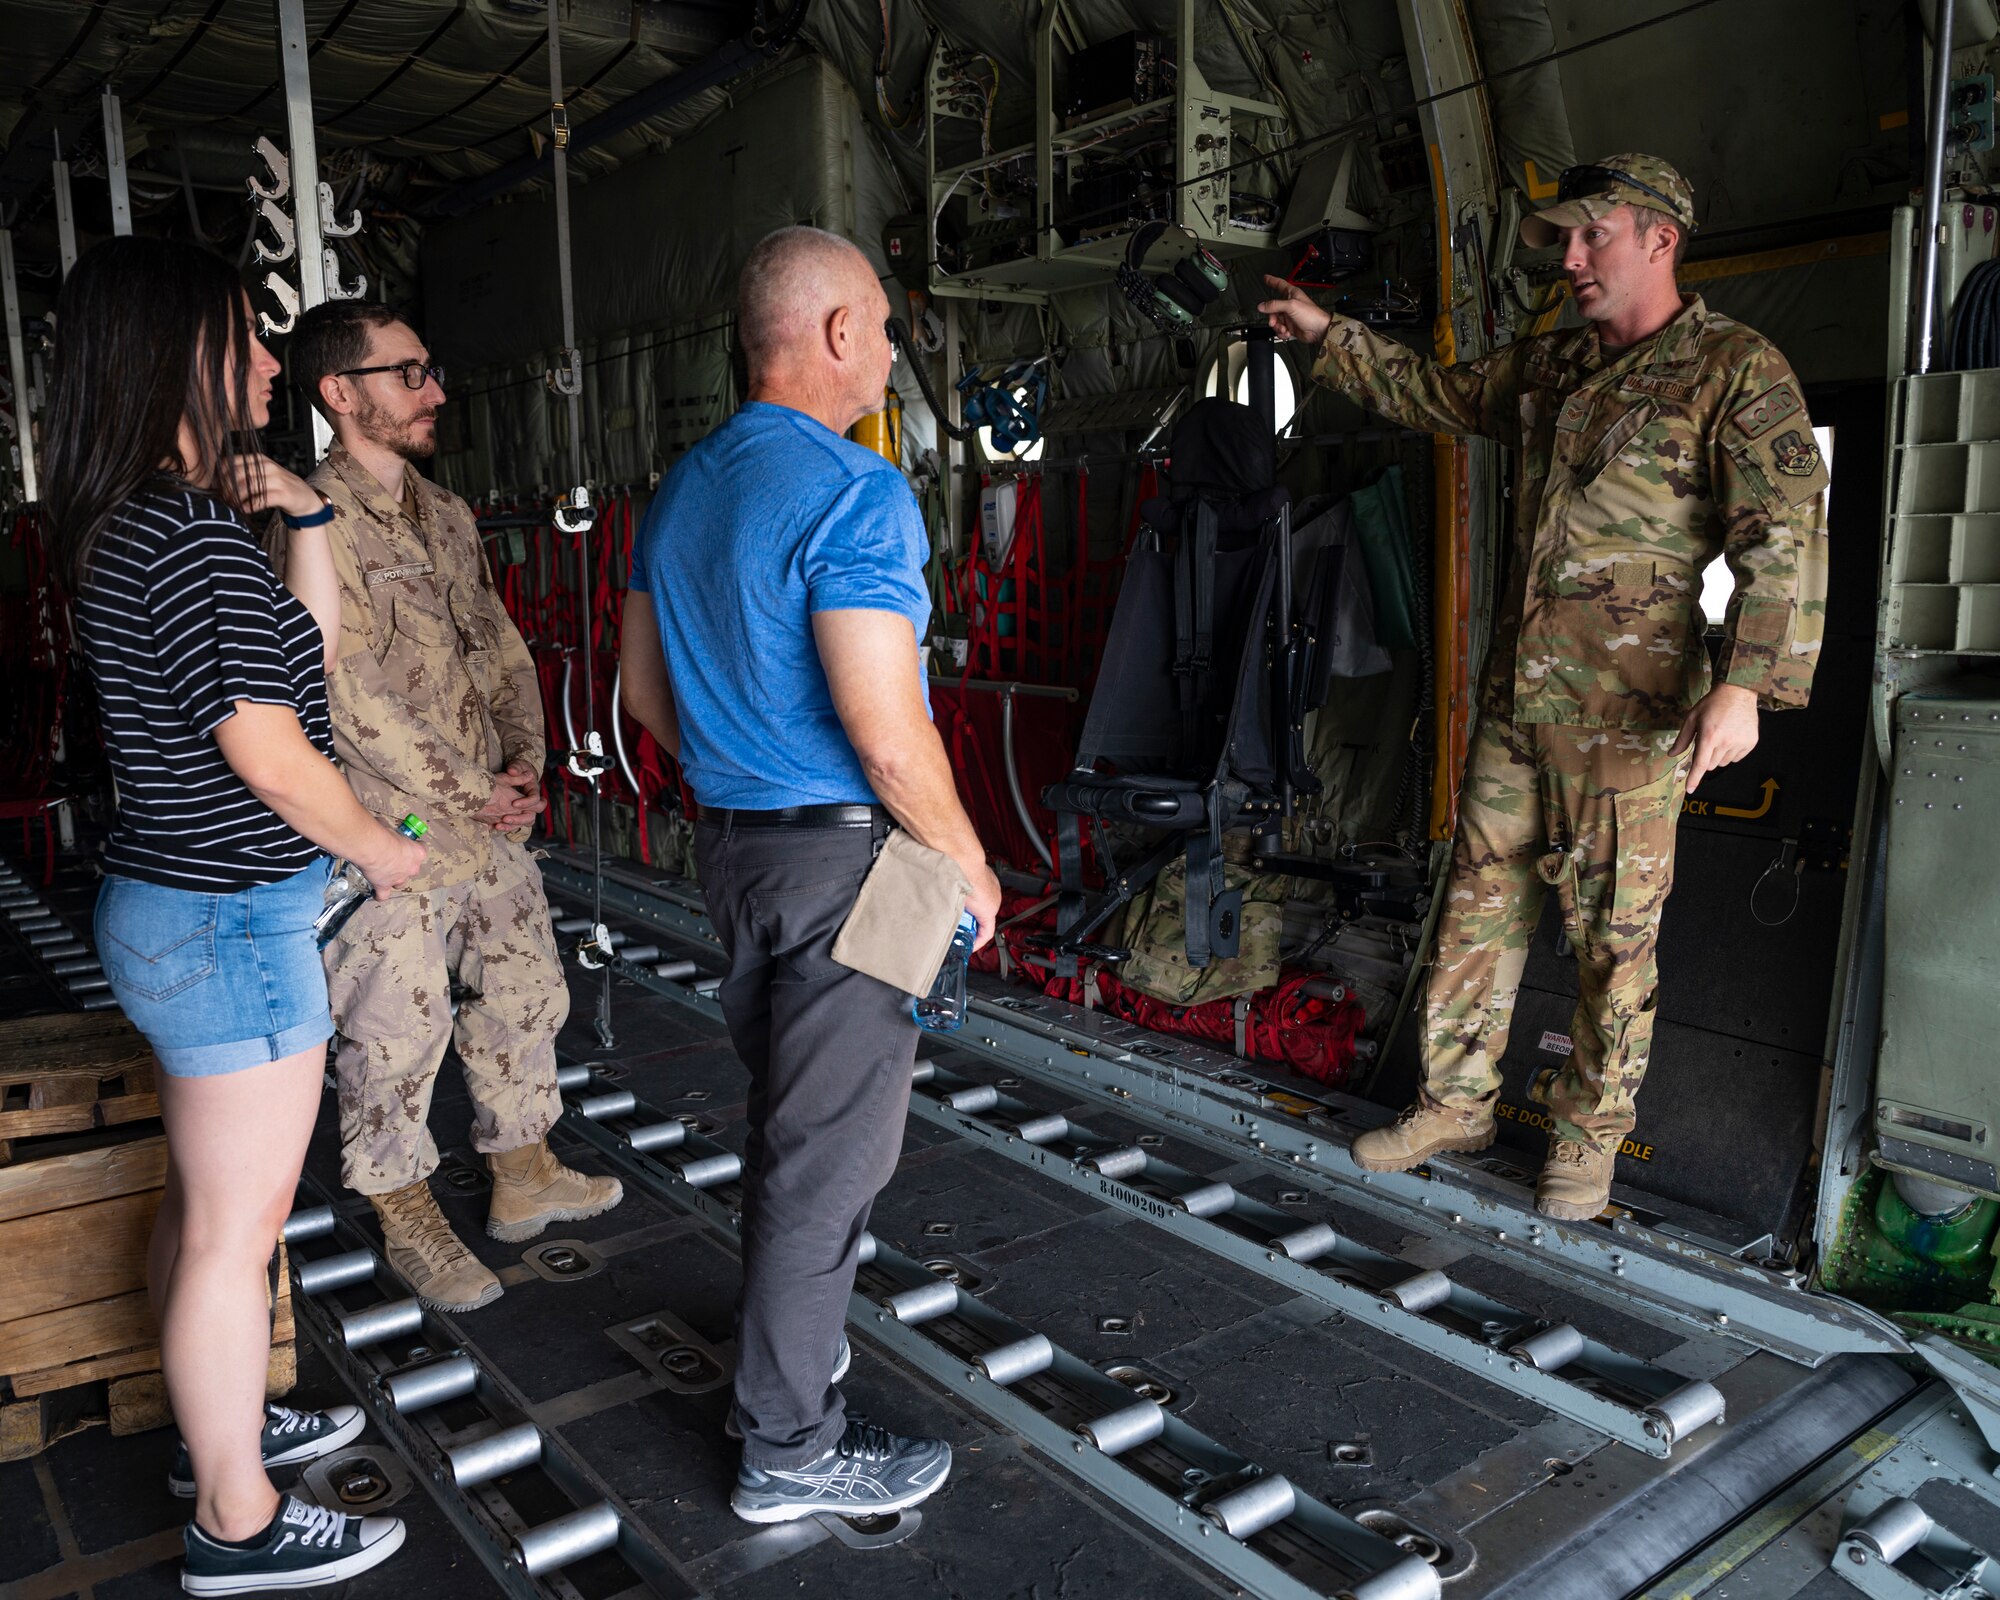 U.S. Air Force Staff Sgt. Brandon King, a loadmaster assigned to the 779th Expeditionary Airlift Squadron, interacts with visitors during a C-130H Hercules tour at Ali Al Salem Air Base, Kuwait, Oct. 9, 2021.